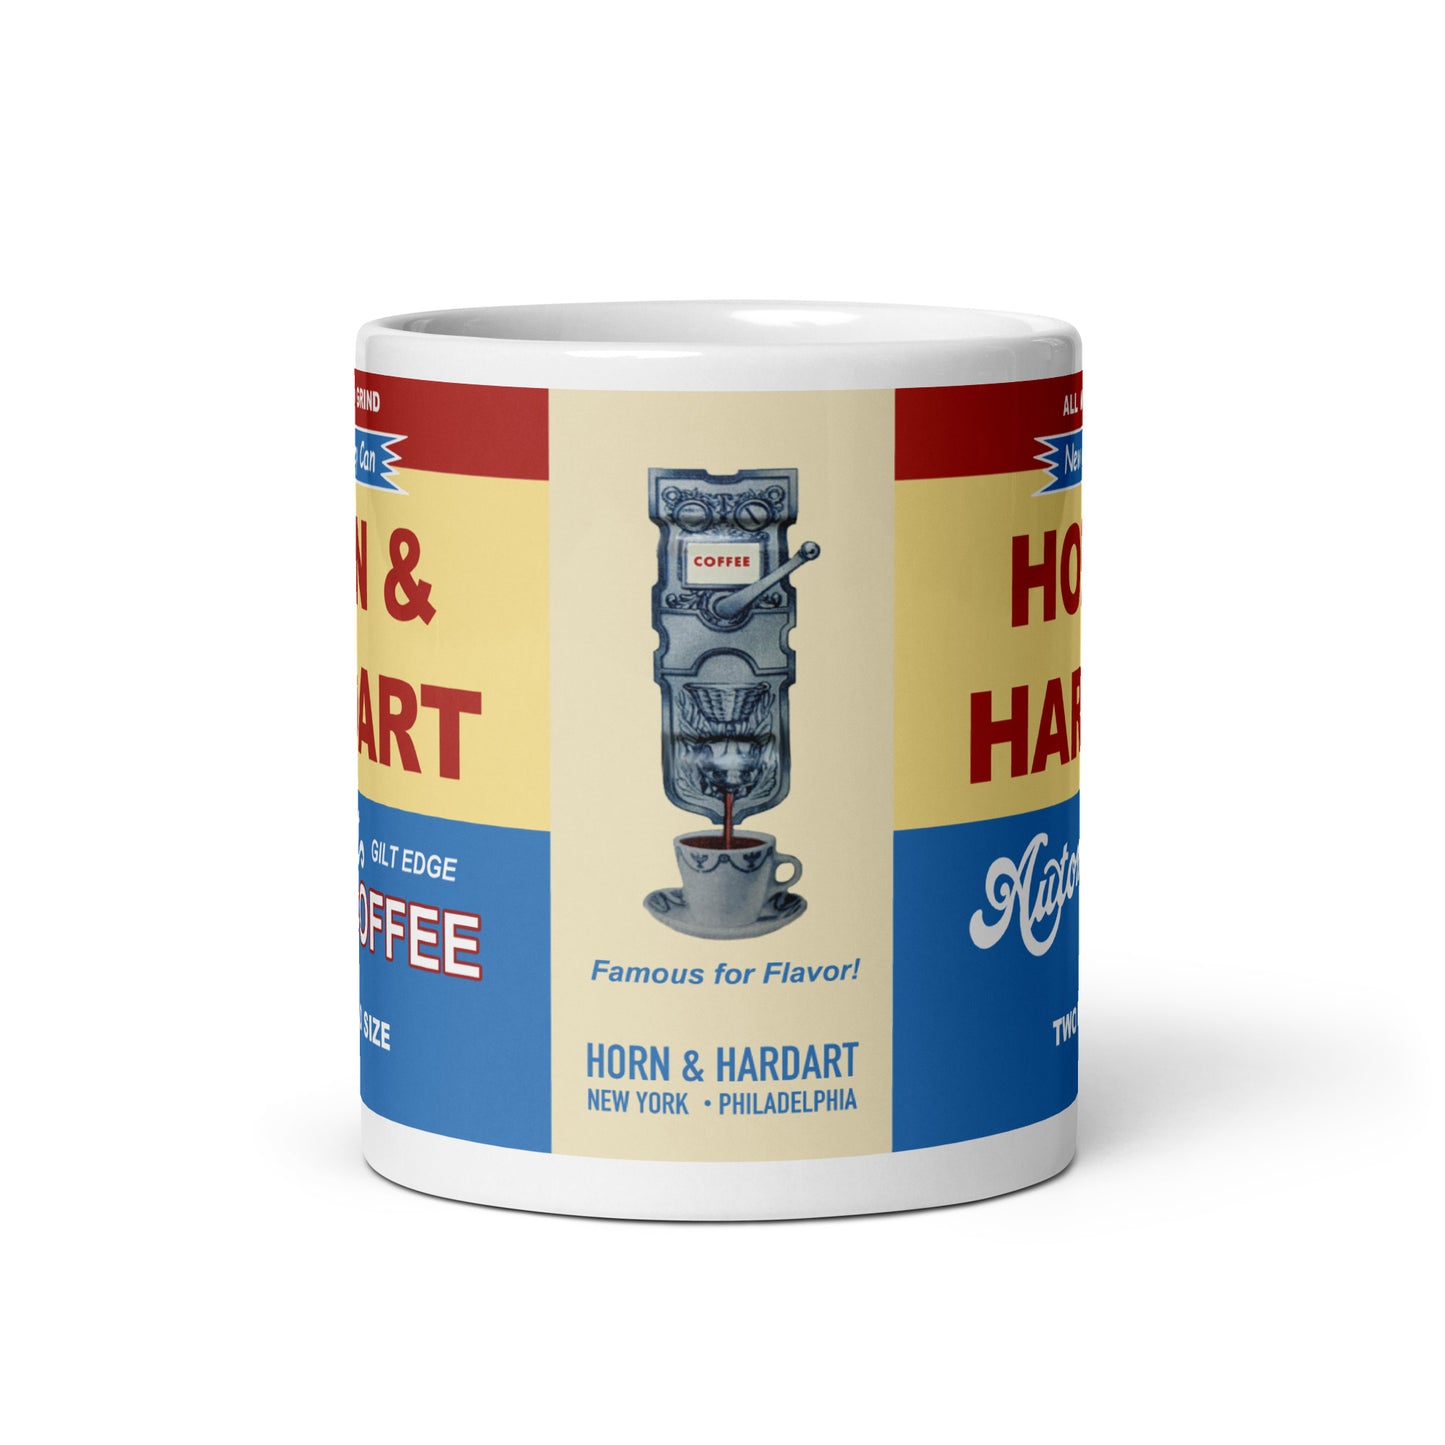 Horn & Hardart All Method Grind Coffee Mug. With dolphin spout.